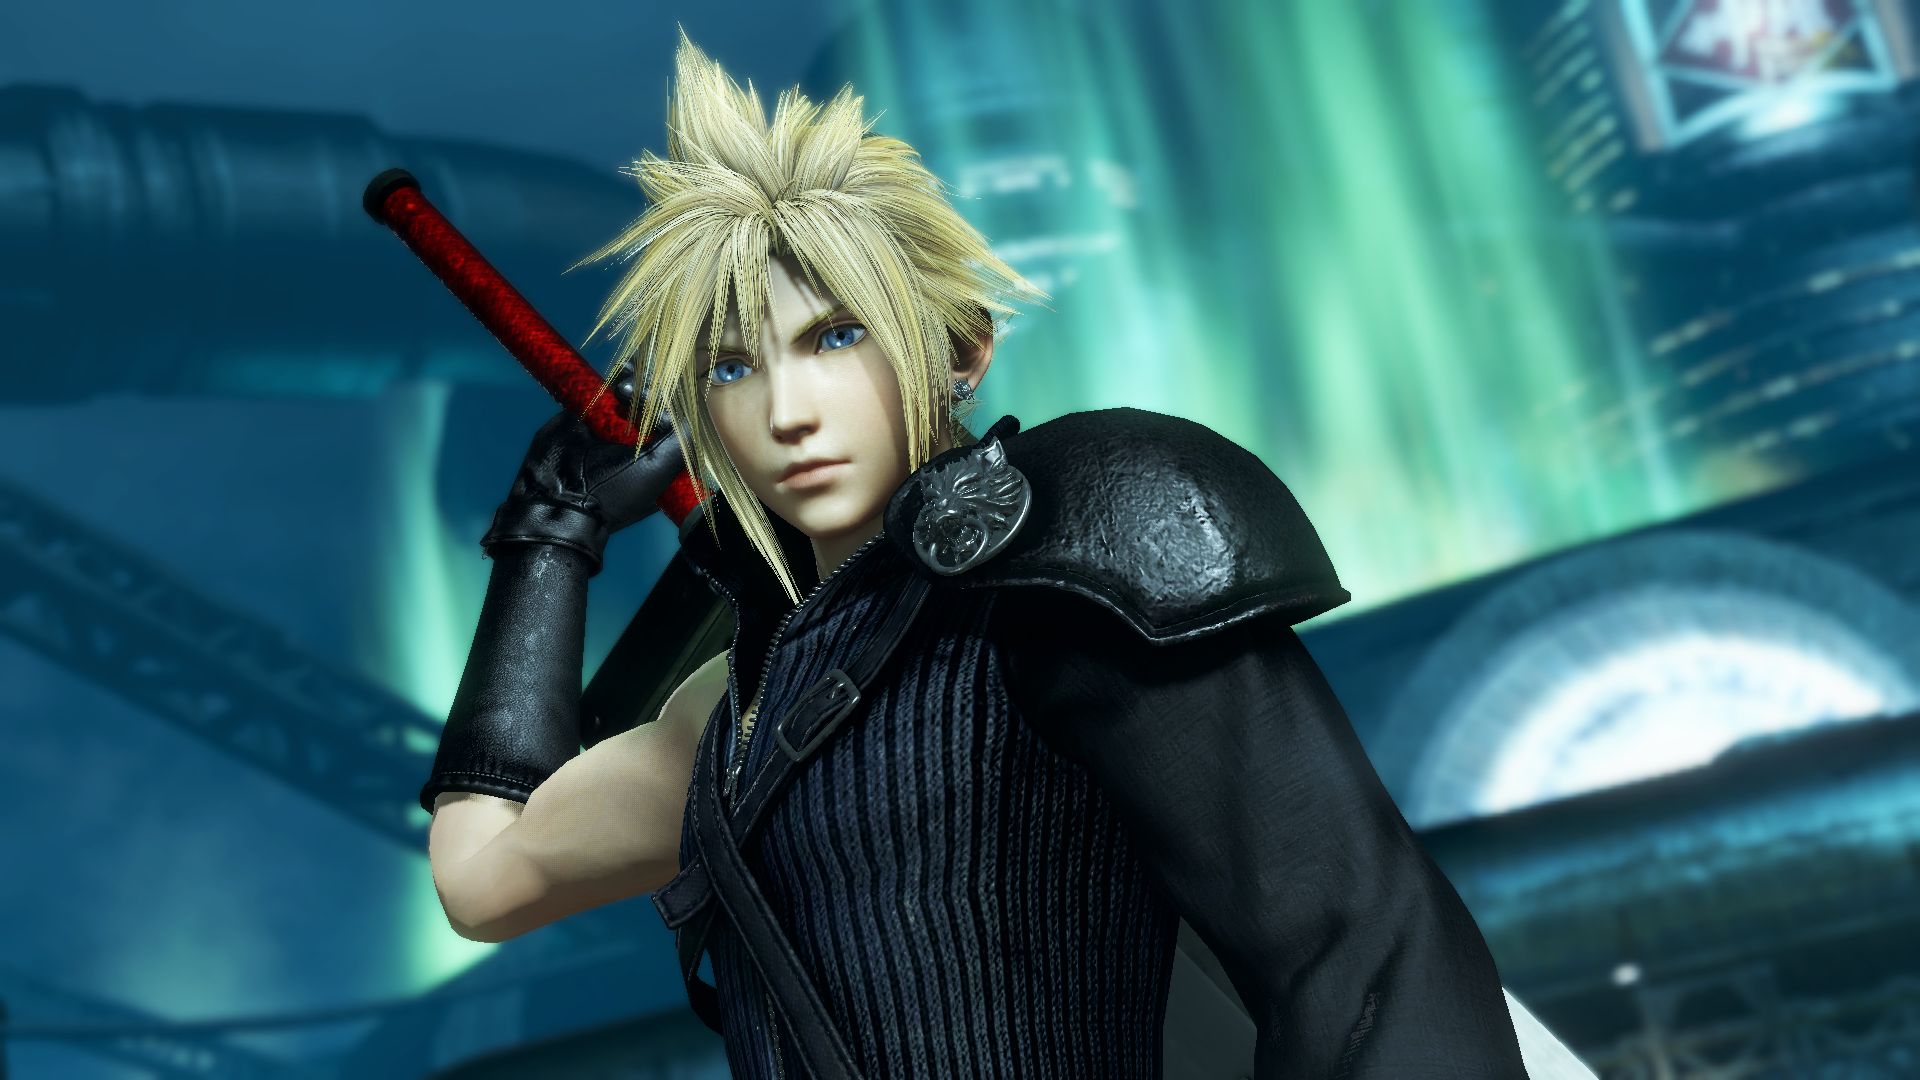 Cloud Strife reaching up to grab his sword on his back in Final Fantasy 7